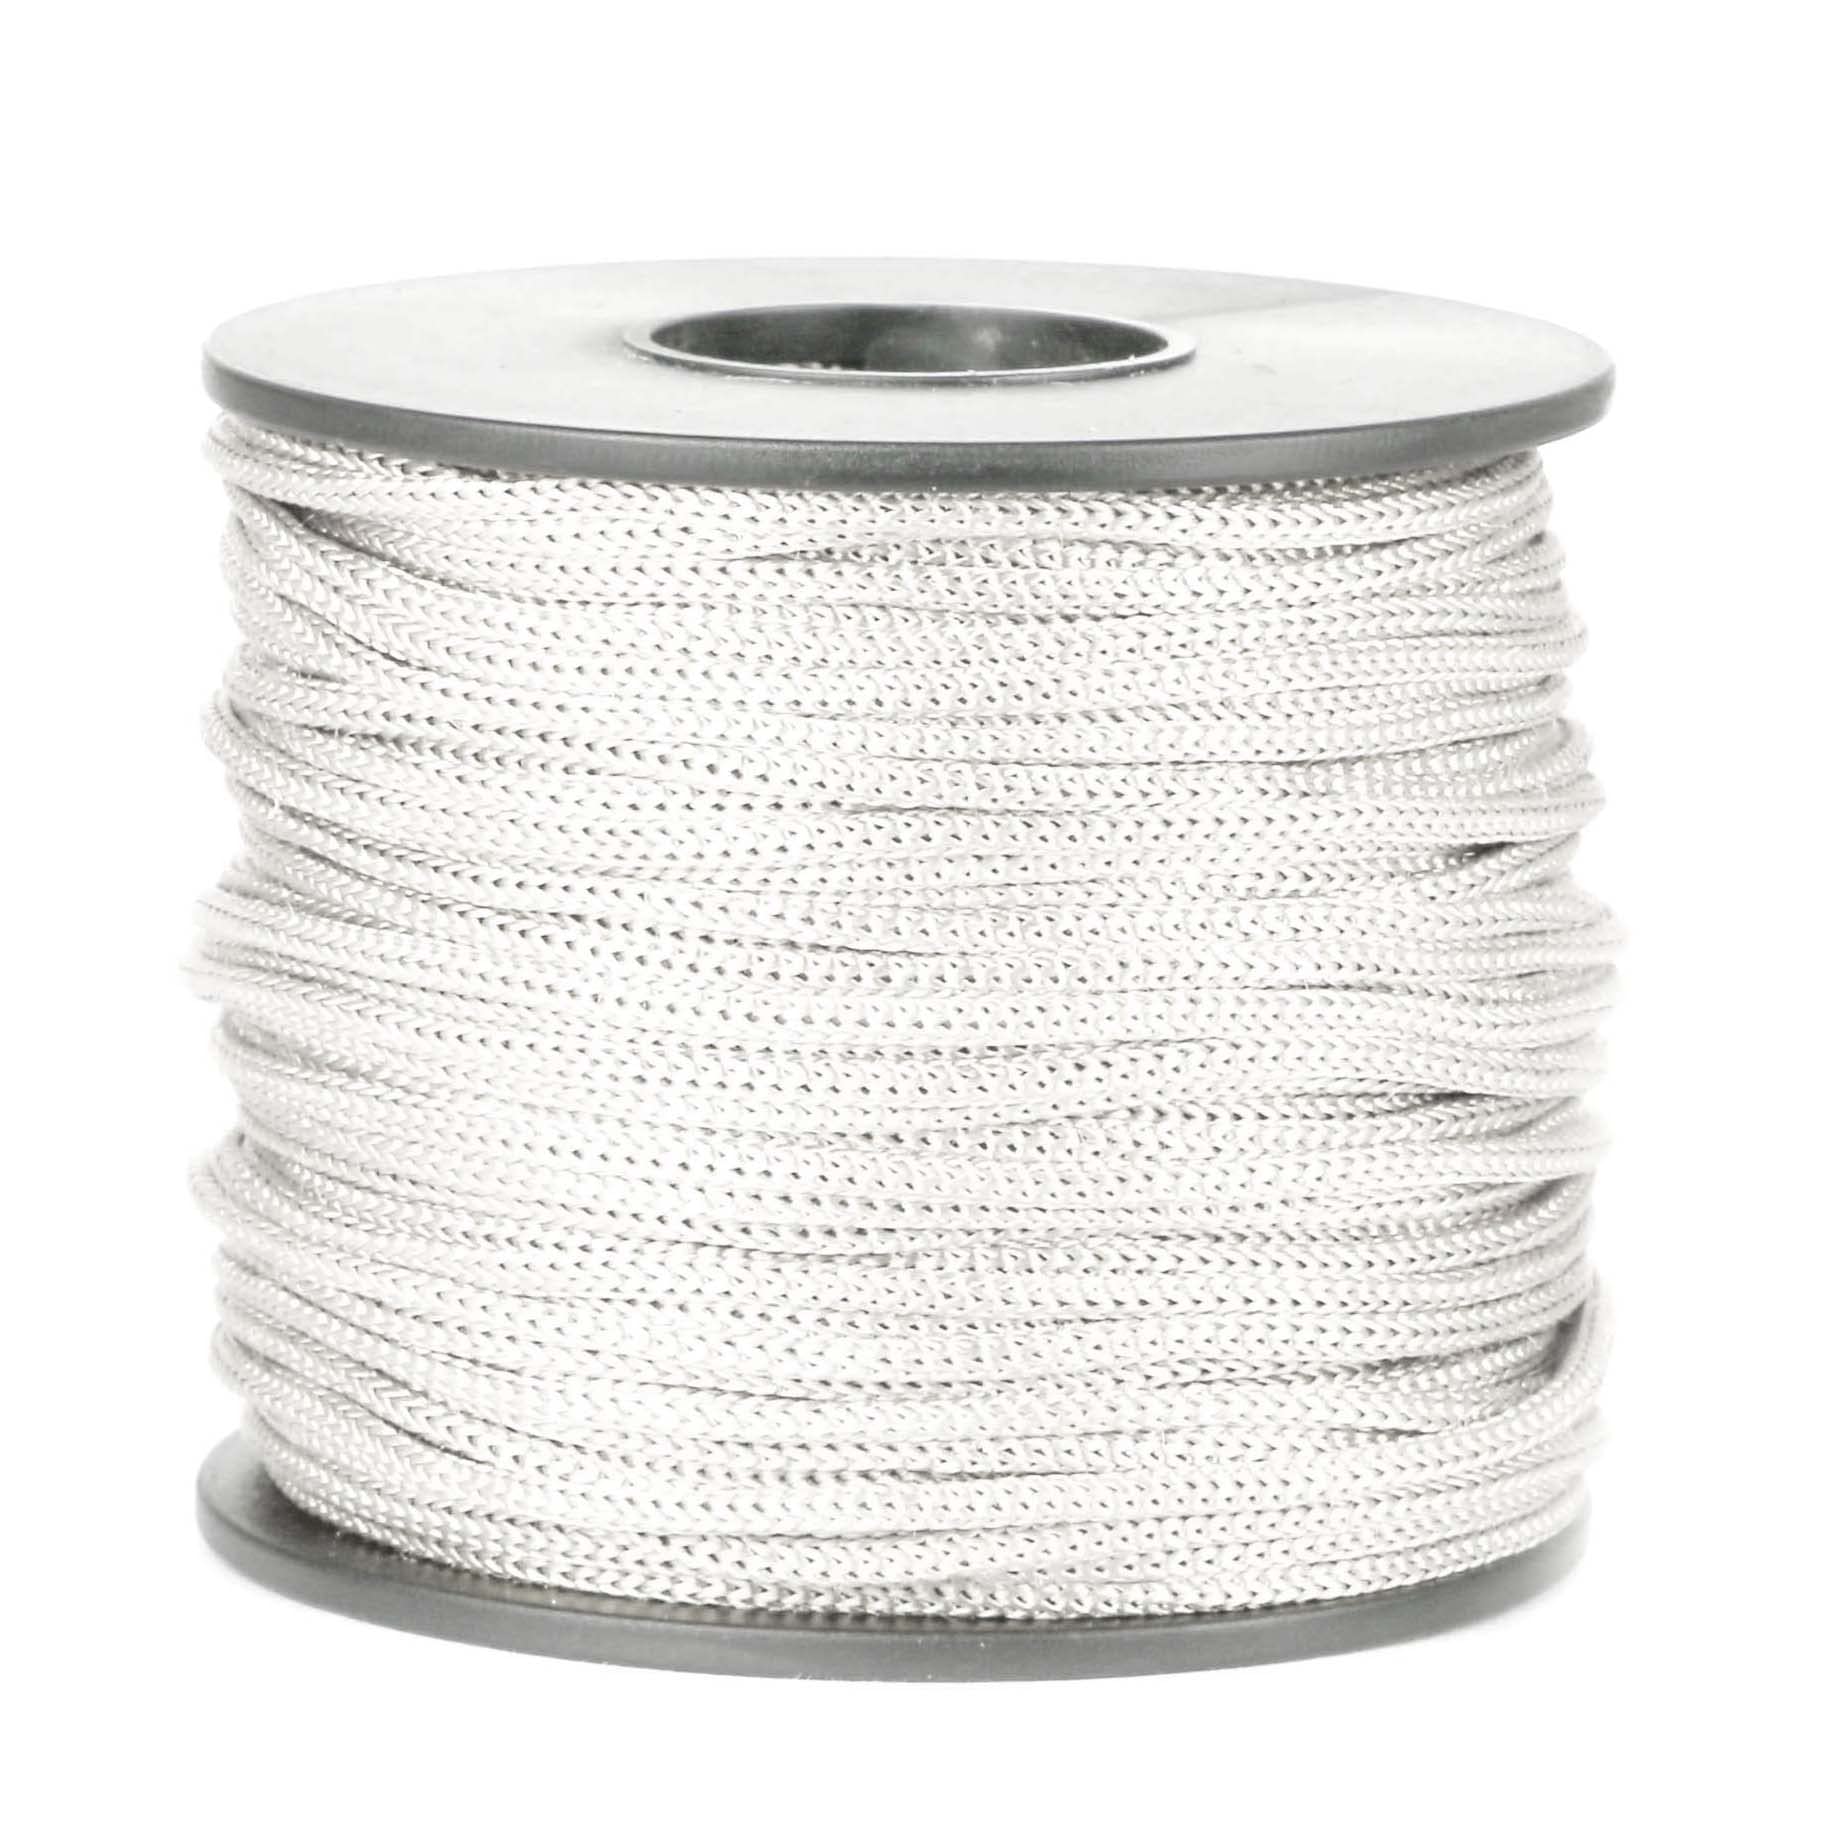 BEL AVENIR Nylon Satin Cord, 2mm 50 Yards Braided Lift Shade Cord for  Necklace Bracelet String Cord, Blind Shade, Trim and Shoelaces (White)